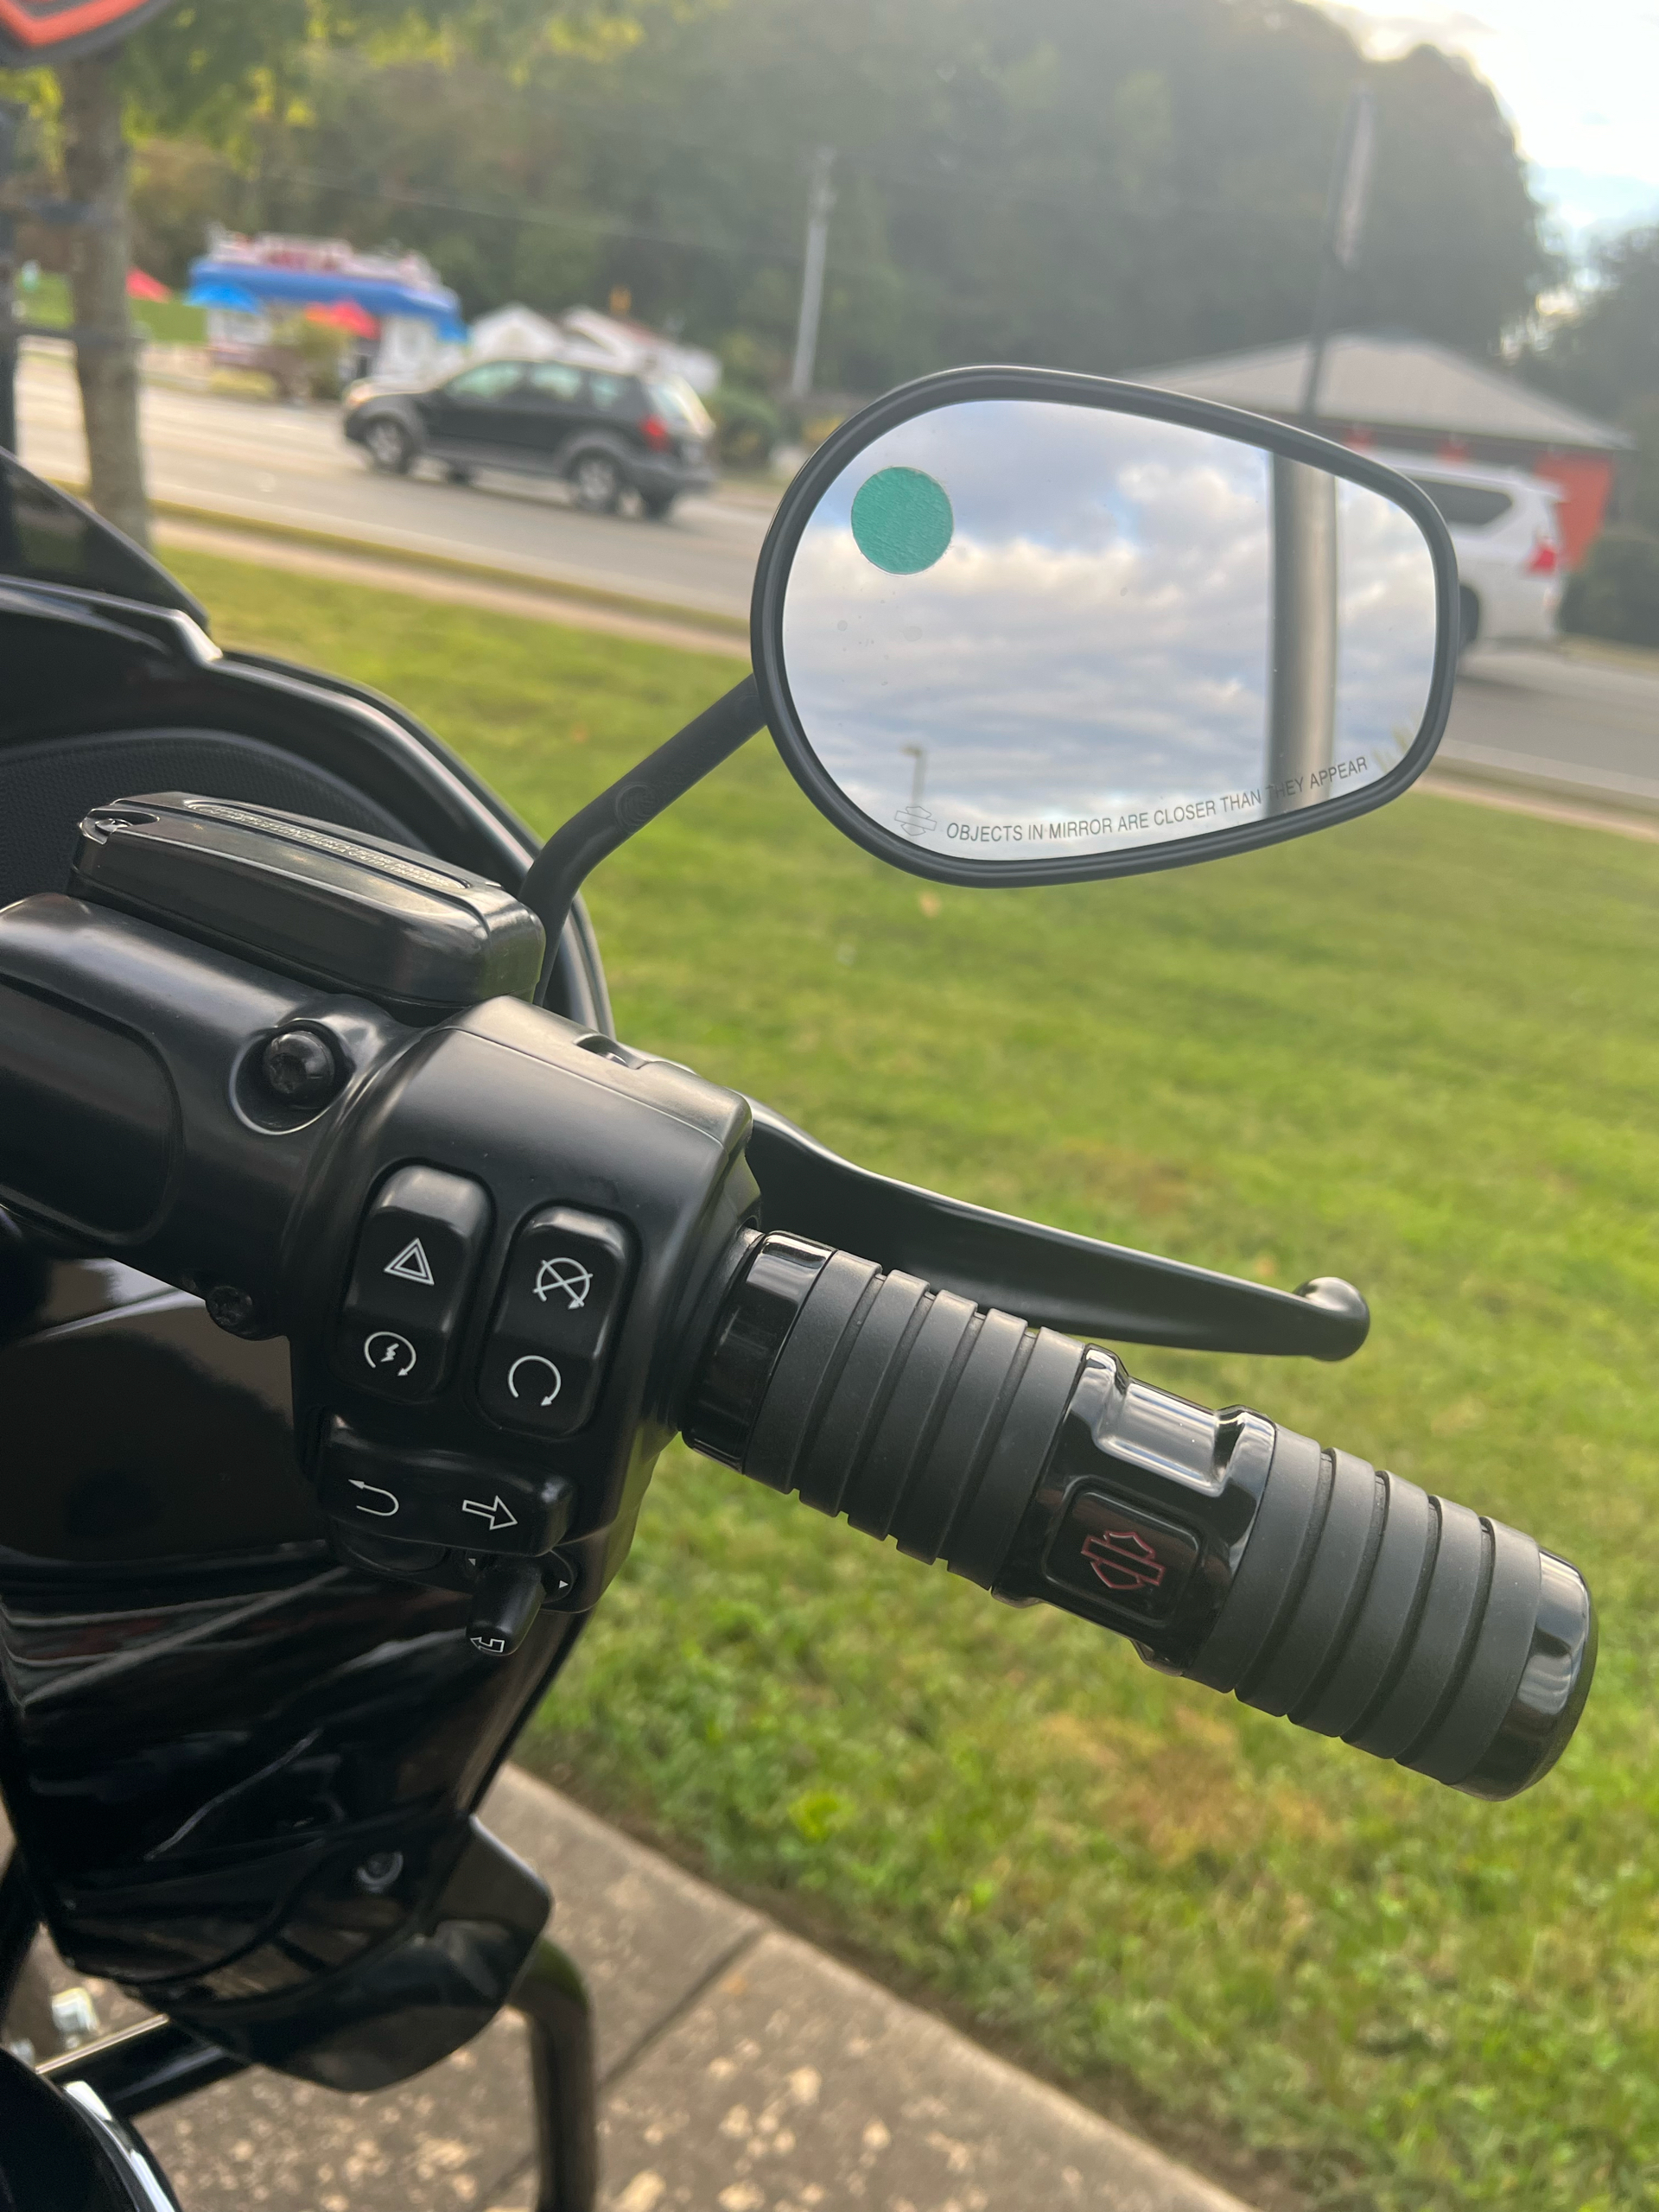 2020 Harley-Davidson ROAD GLIDE SPECIAL in Dumfries, Virginia - Photo 11